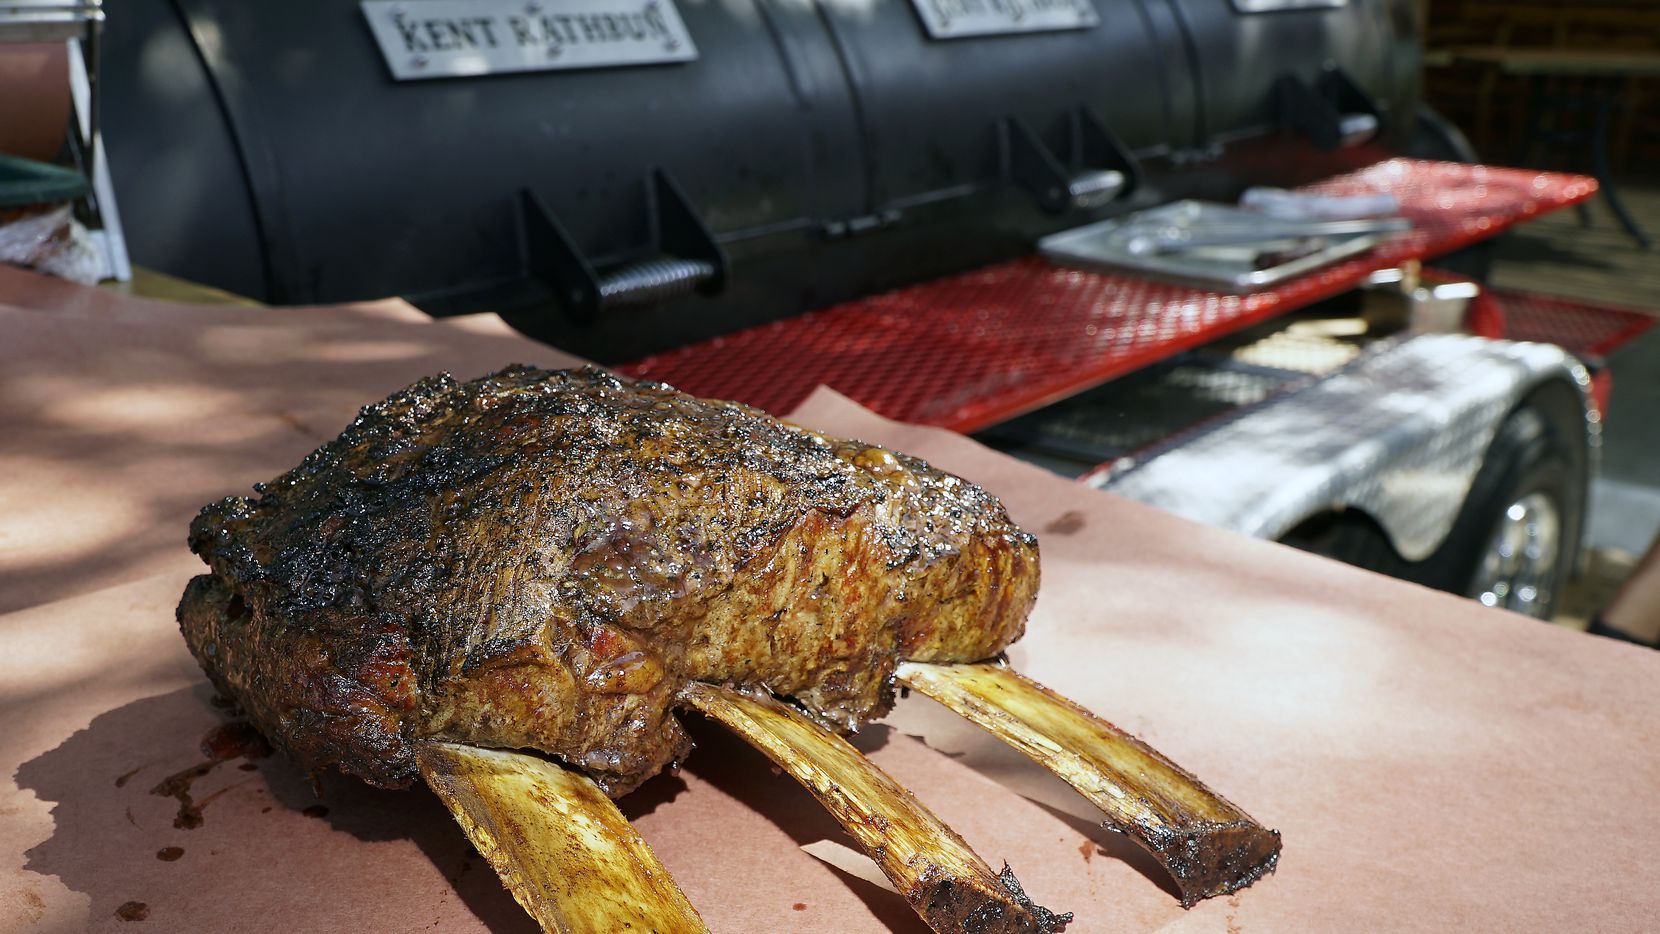 Rathbun's Curbside BBQ sells beef ribs (pictured) plus whole briskets, pork ribs, smoked...